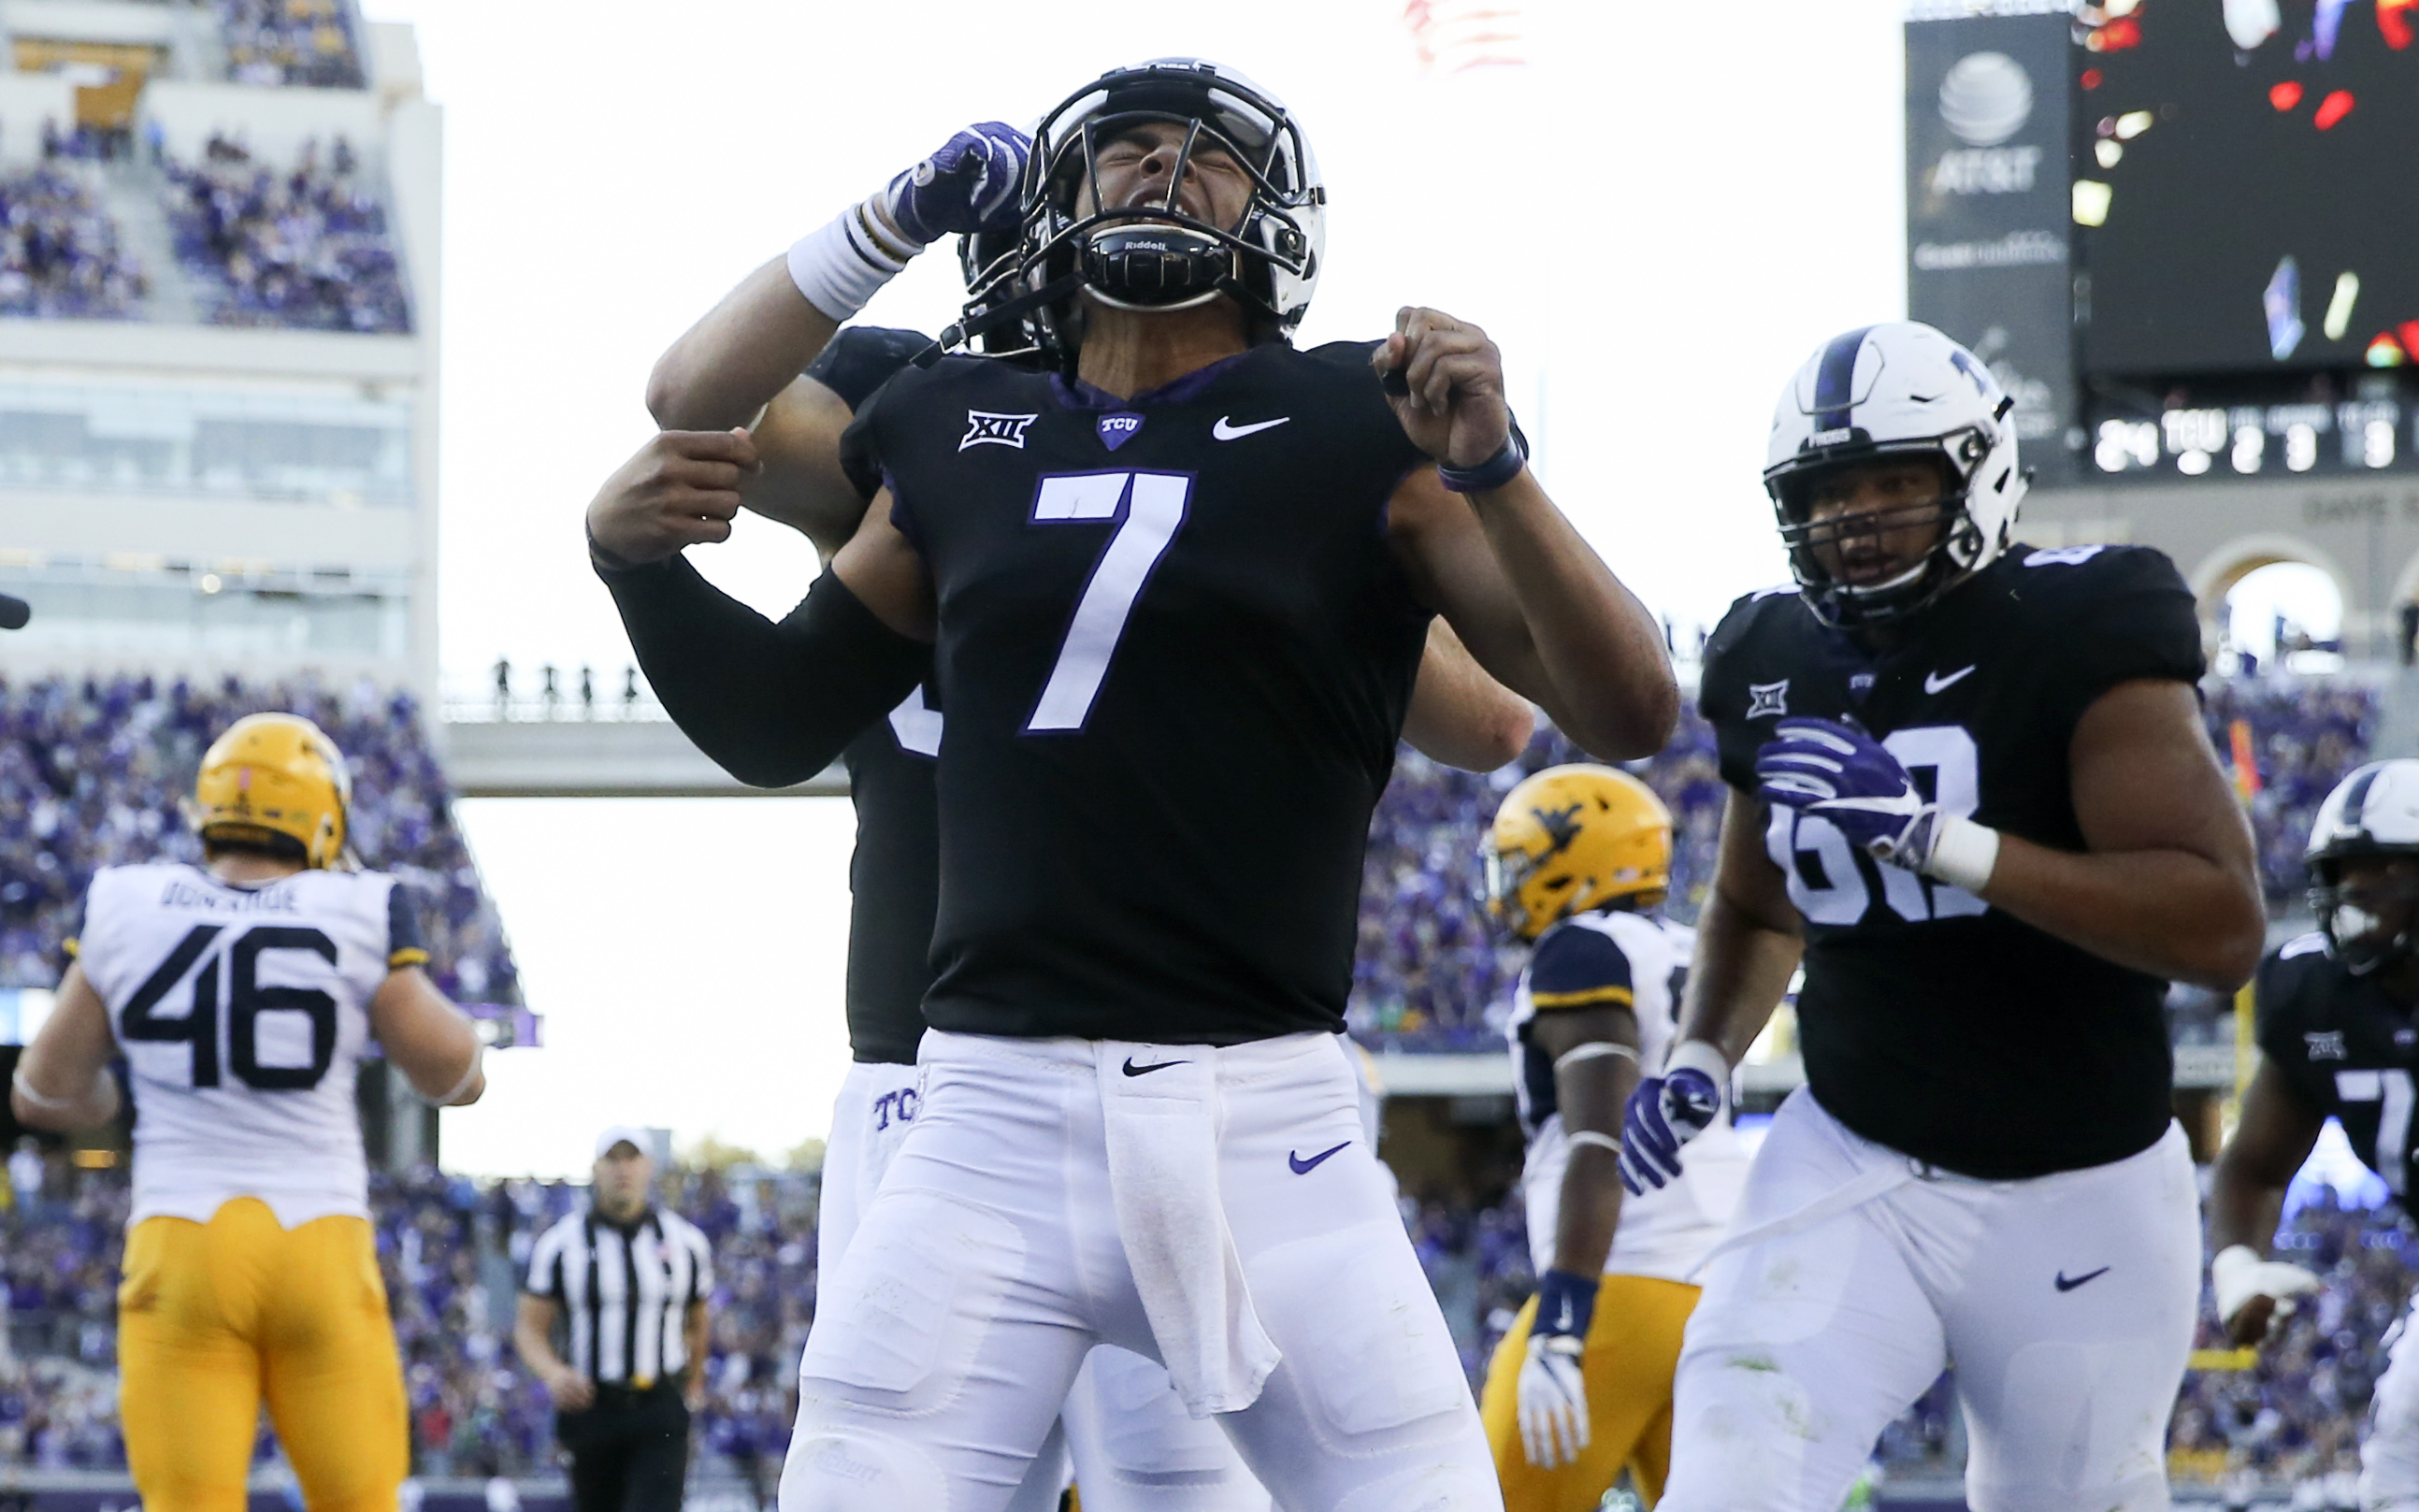 TCU up to #6 in latest Associated Press Top 25 poll